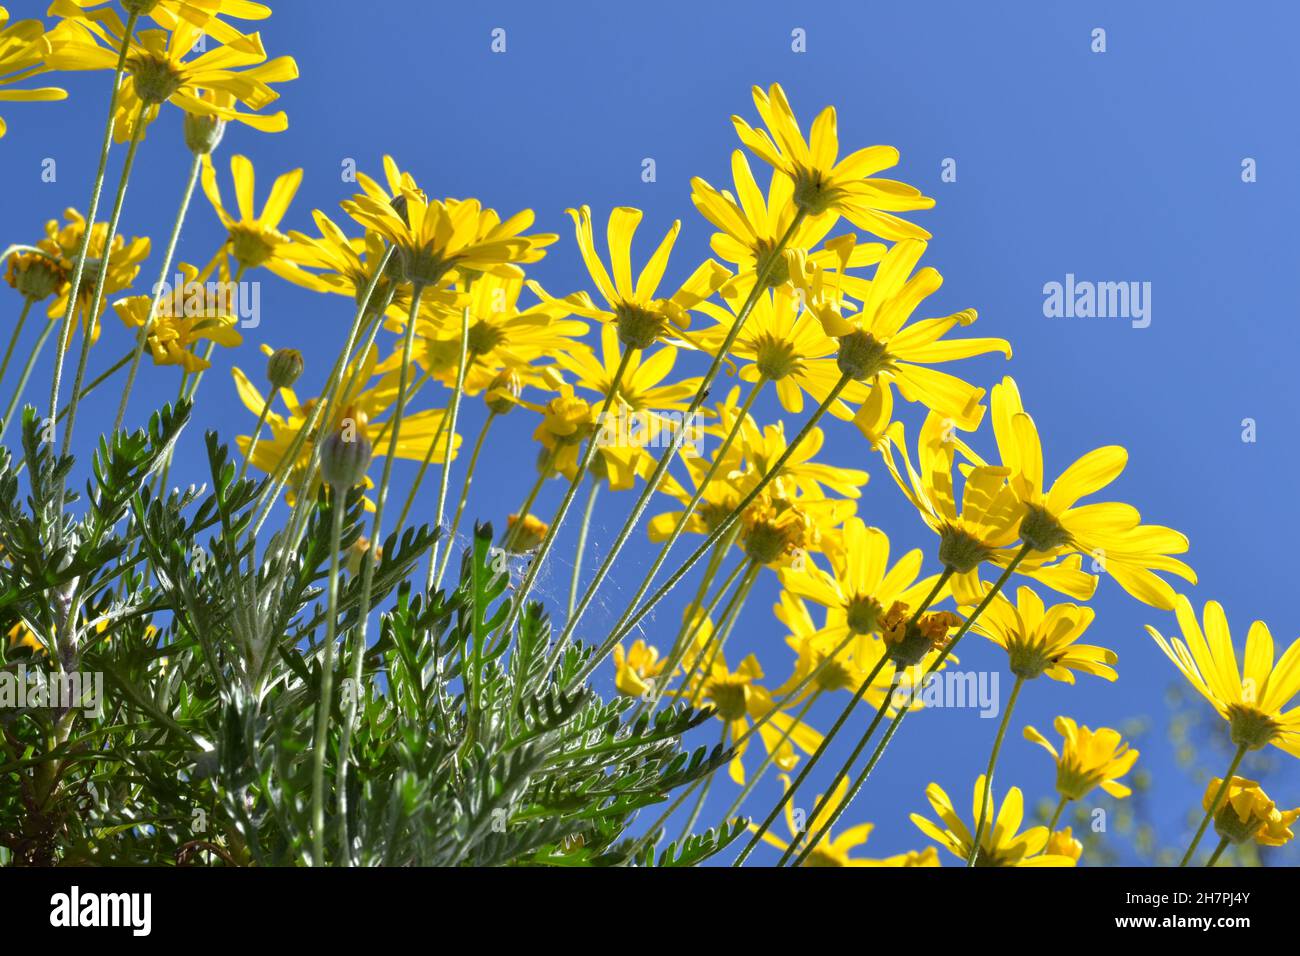 Beautiful Yellow Daisy Flowers on the Backgorund of Blue Sky. Close-up View. Stock Photo